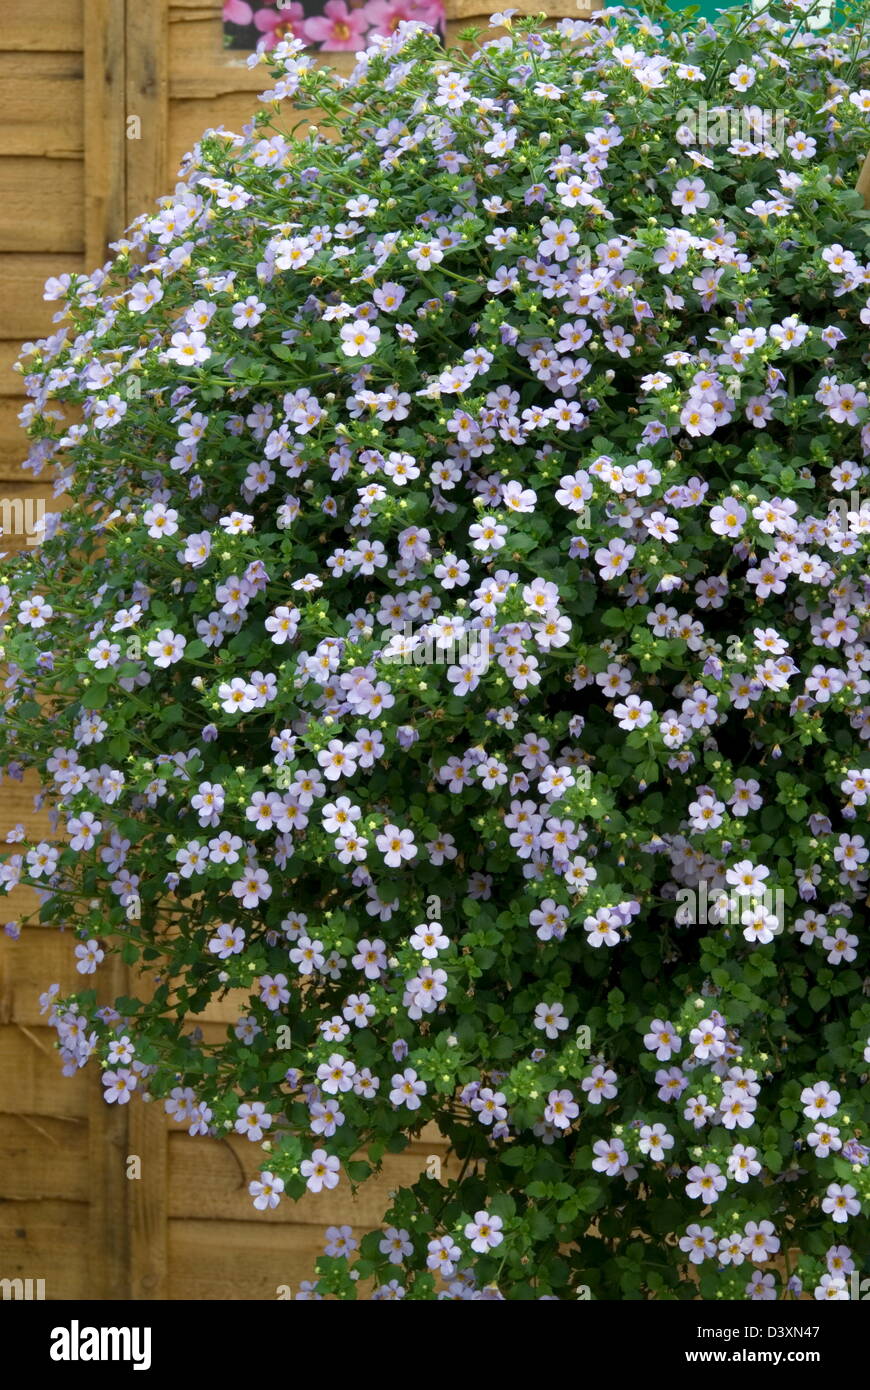 Bacopa Abunda Colossal 'Sky Blue'. Date: 03.11.2008 Ref: ZB907 123496 0078 COMPULSORY CREDIT: Photos Horticultural/Photoshot Stock Photo